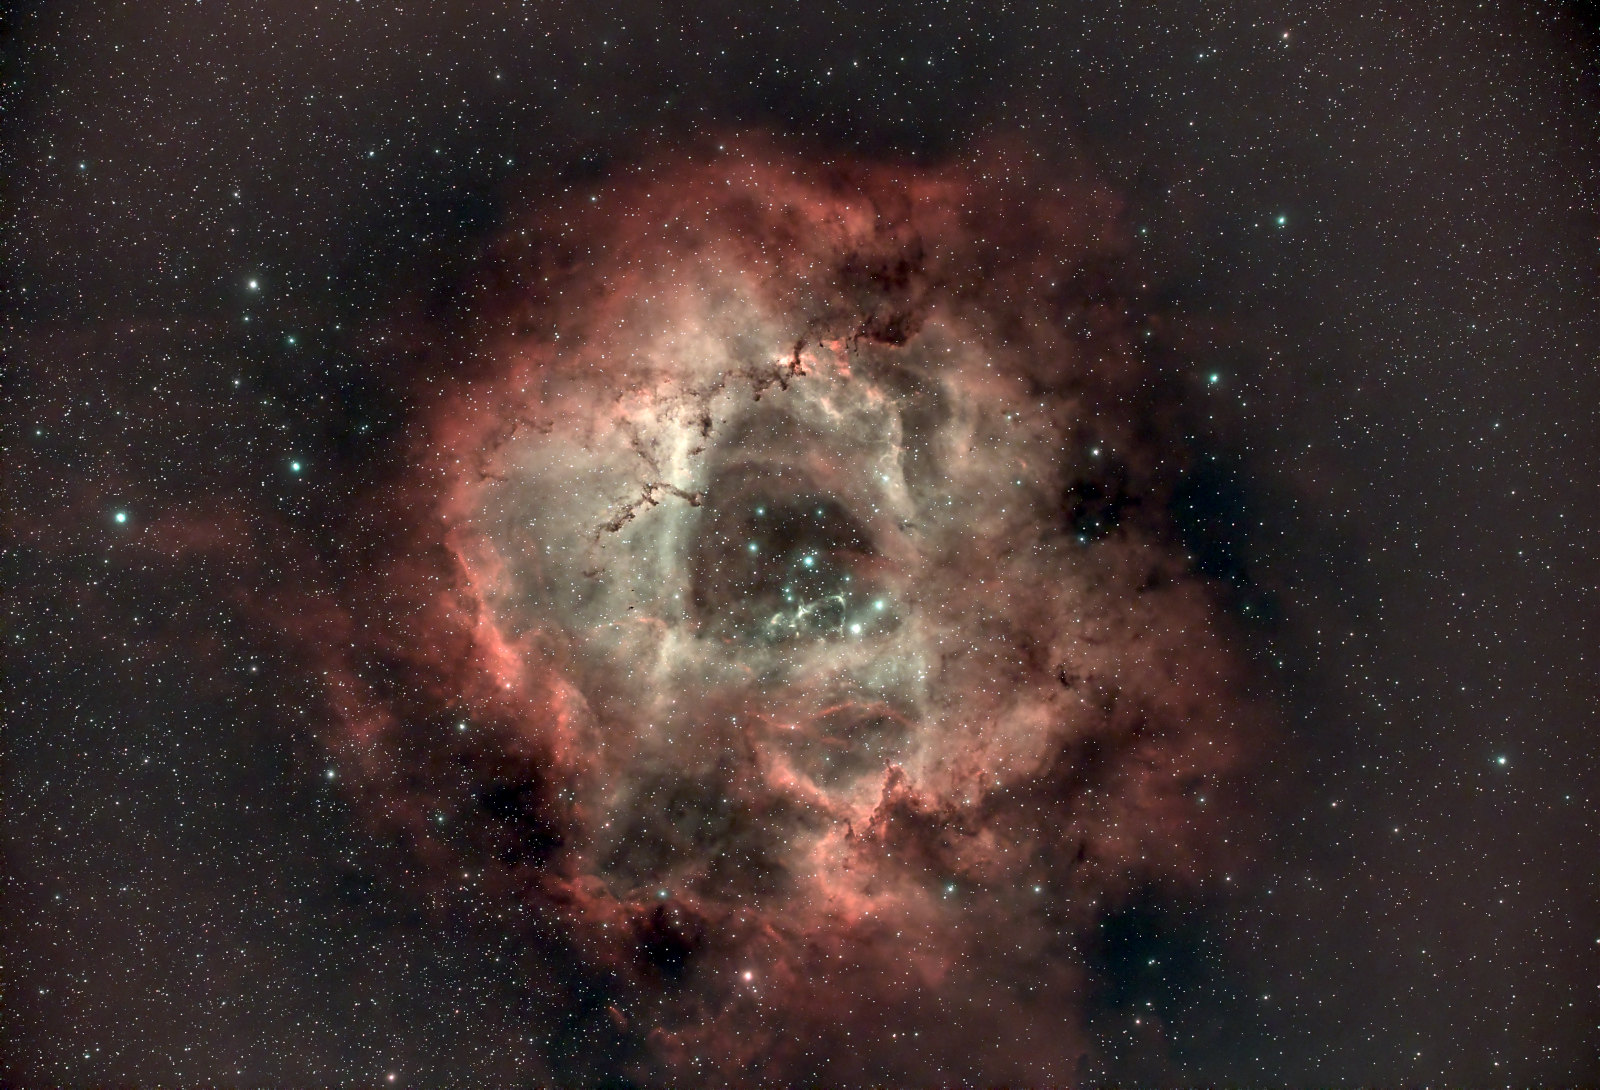 The standard view of the Rosette Nebula